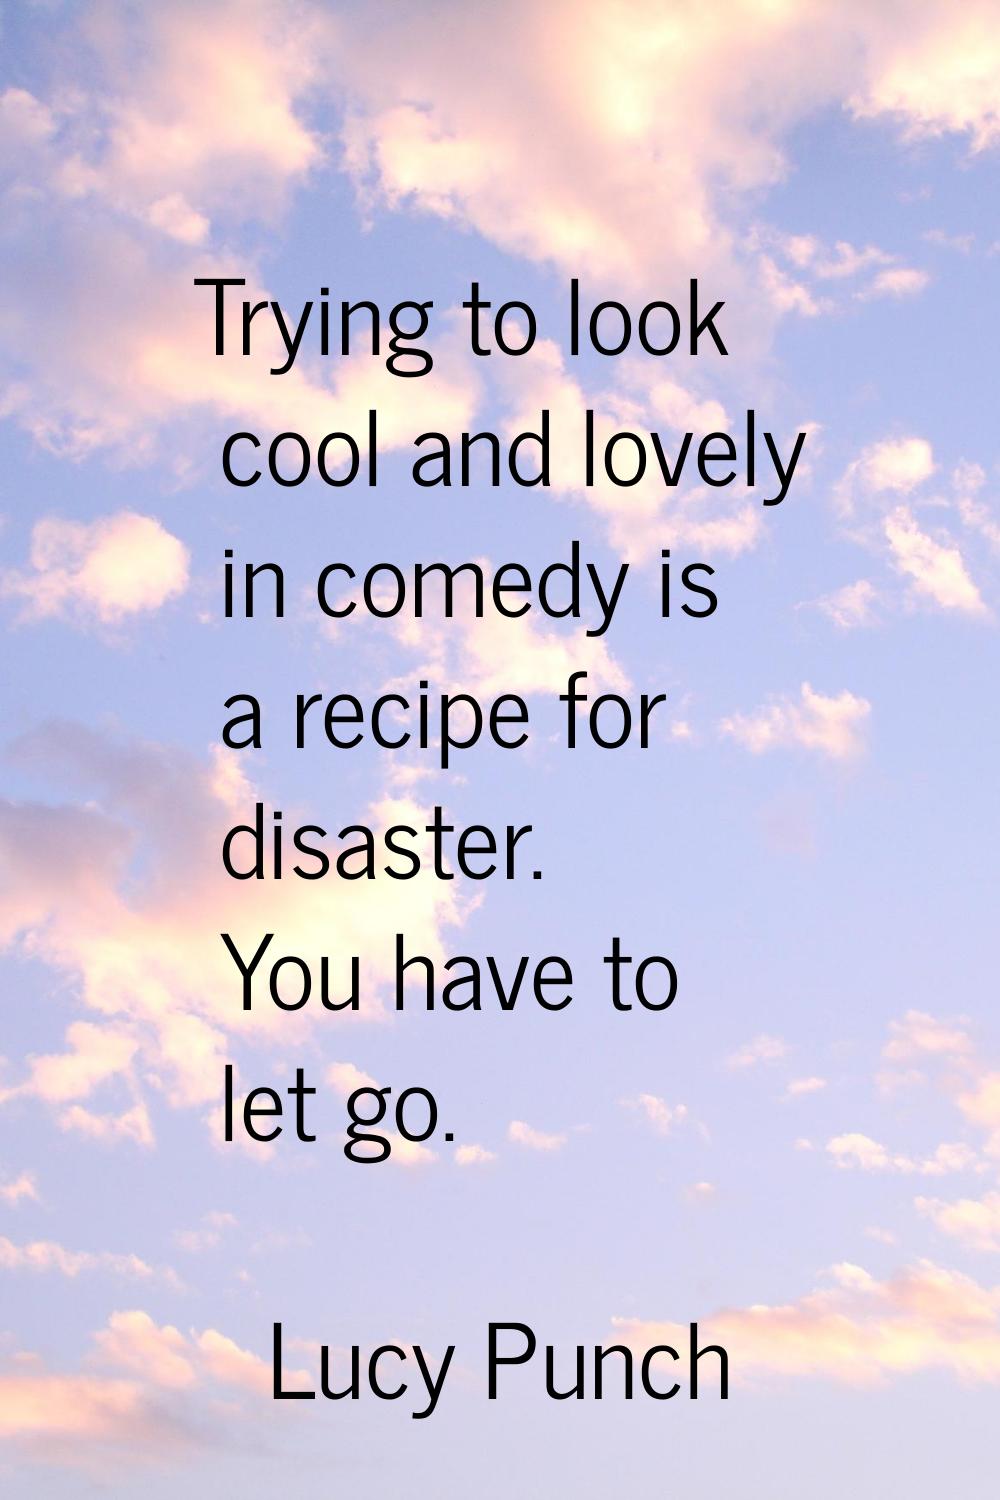 Trying to look cool and lovely in comedy is a recipe for disaster. You have to let go.